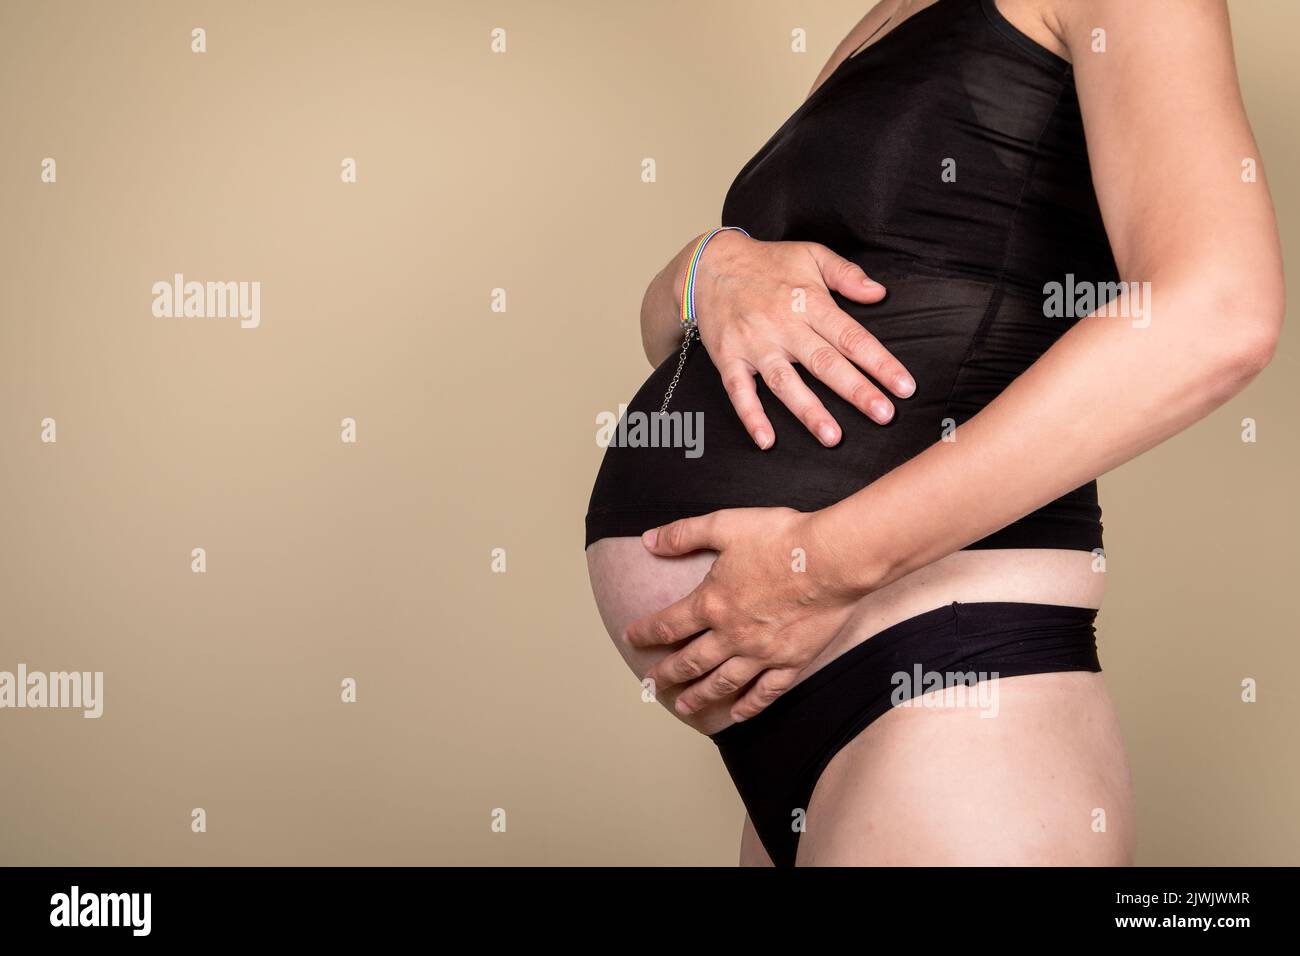 Pregnant woman, hands on stomach. Love and family concept. Stock Photo